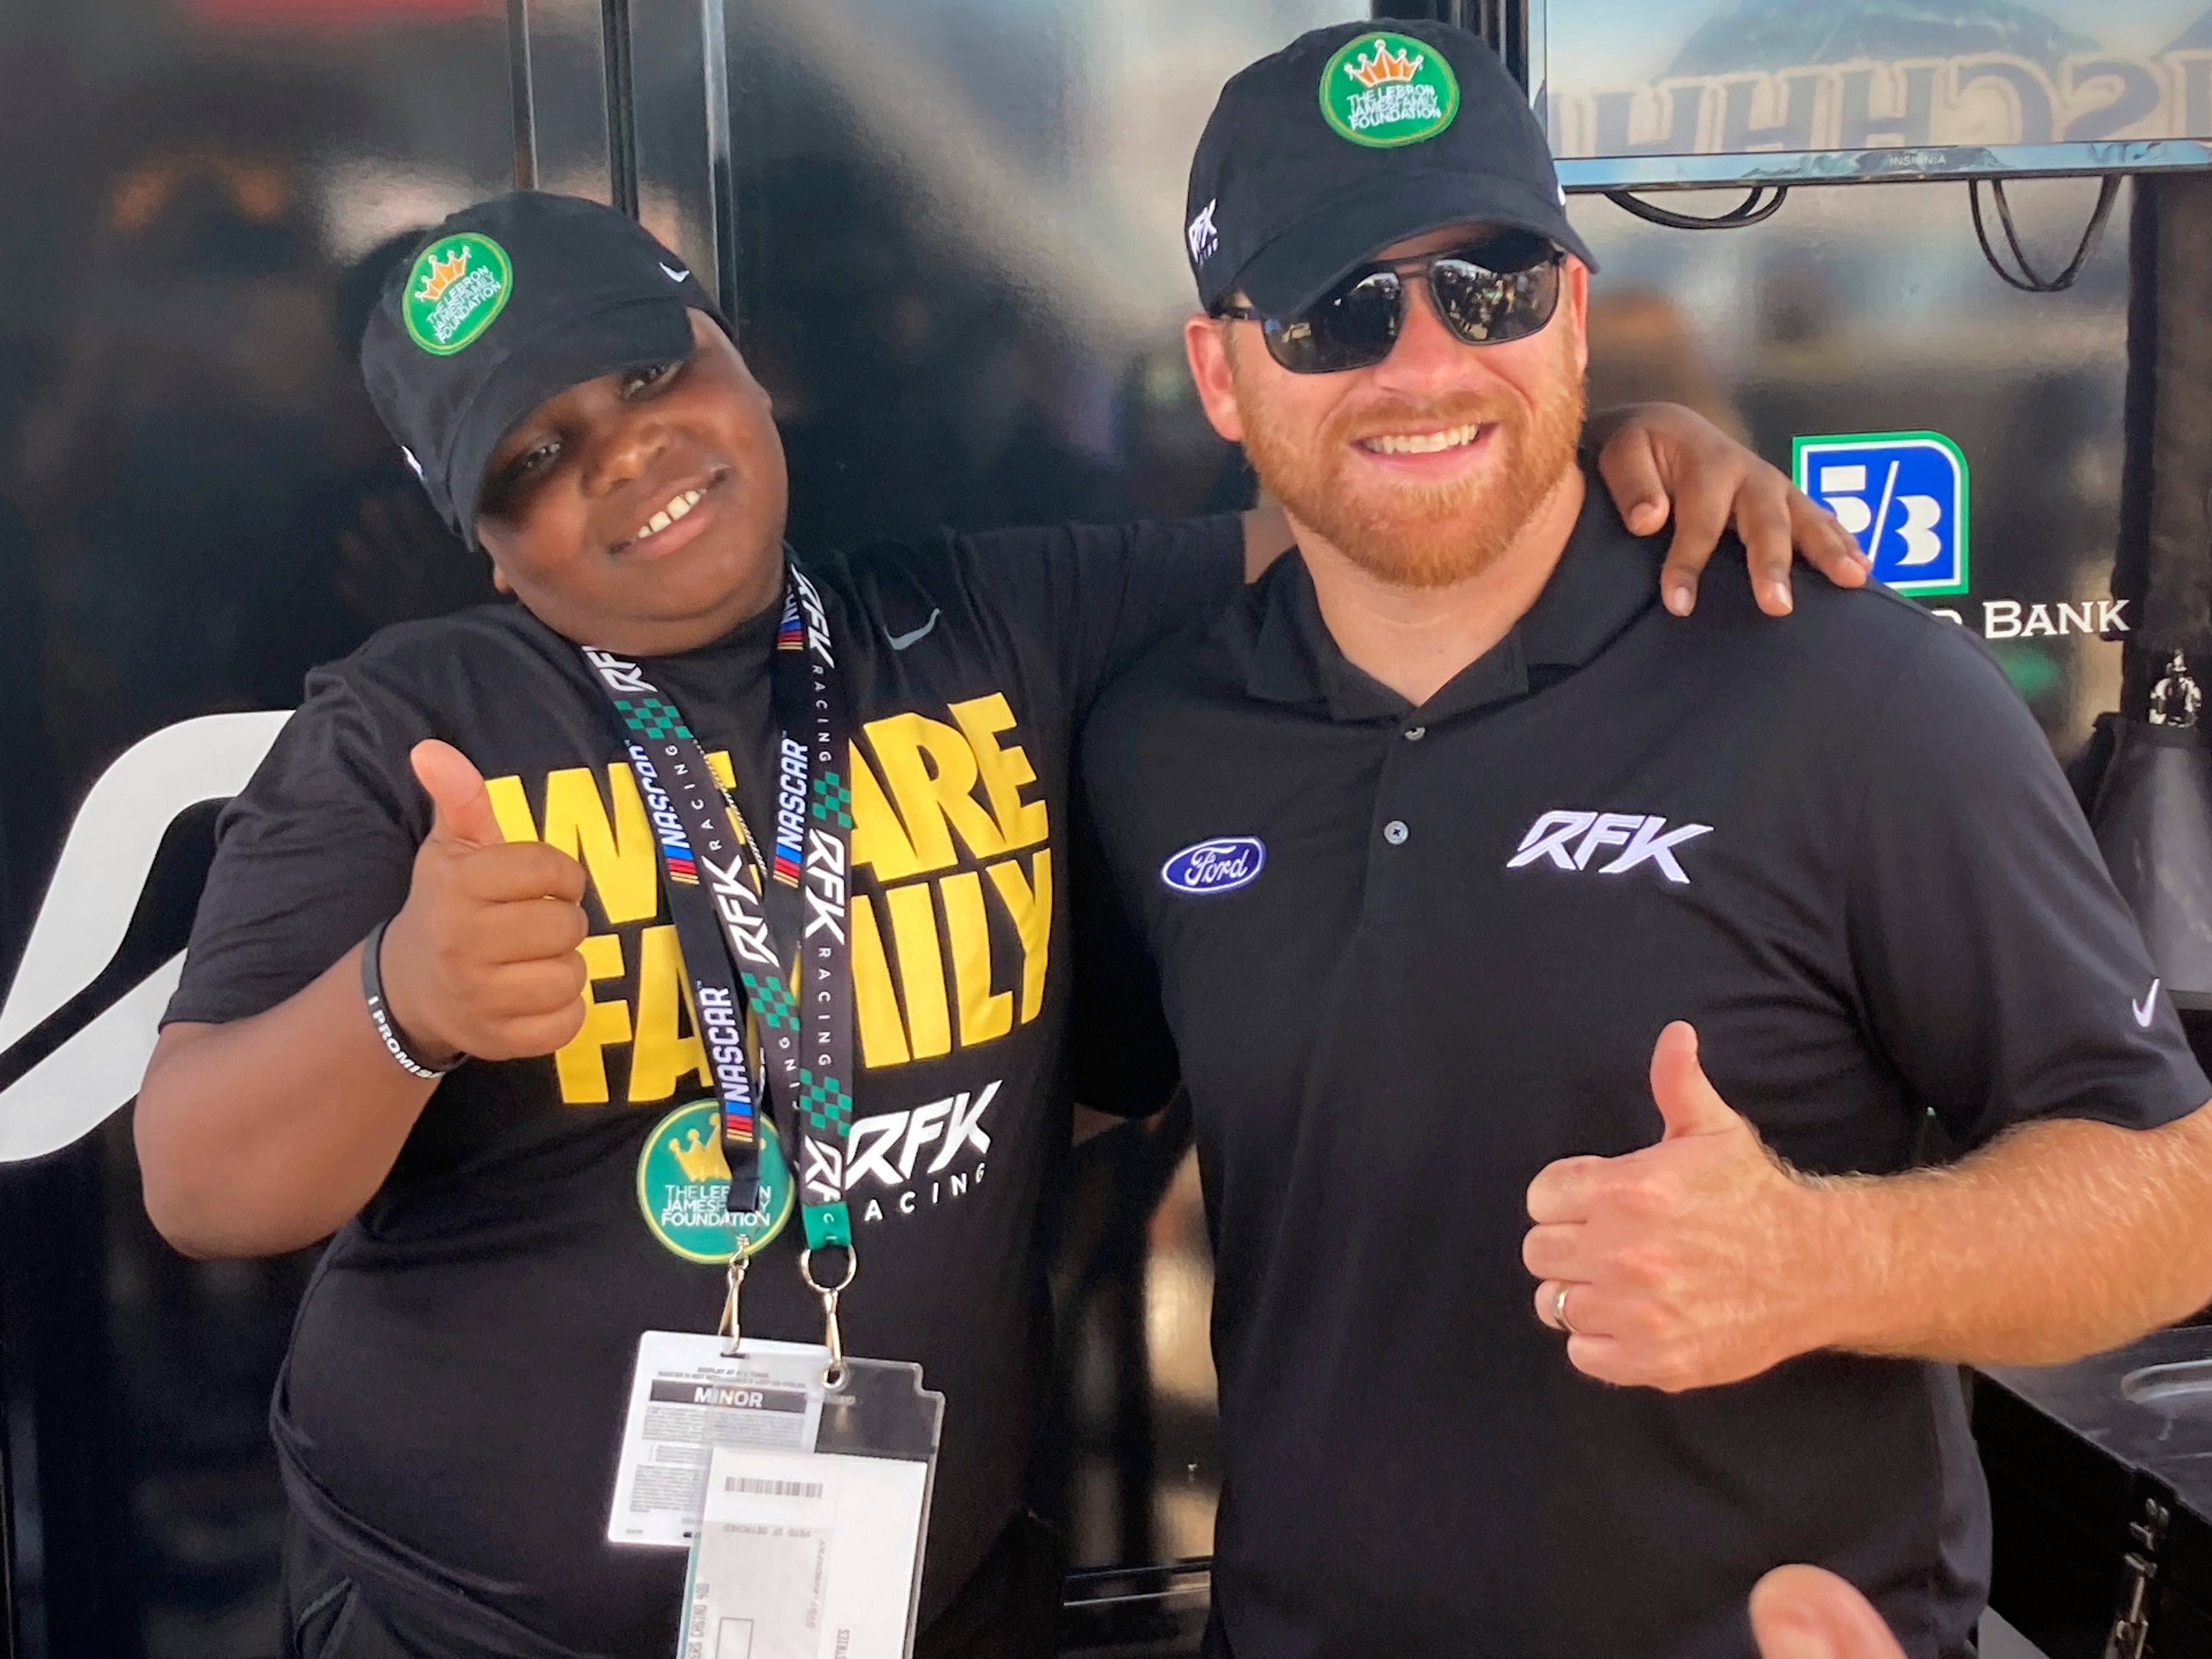 A LeBron James school student is given an all-access trip to a NASCAR event in Michigan